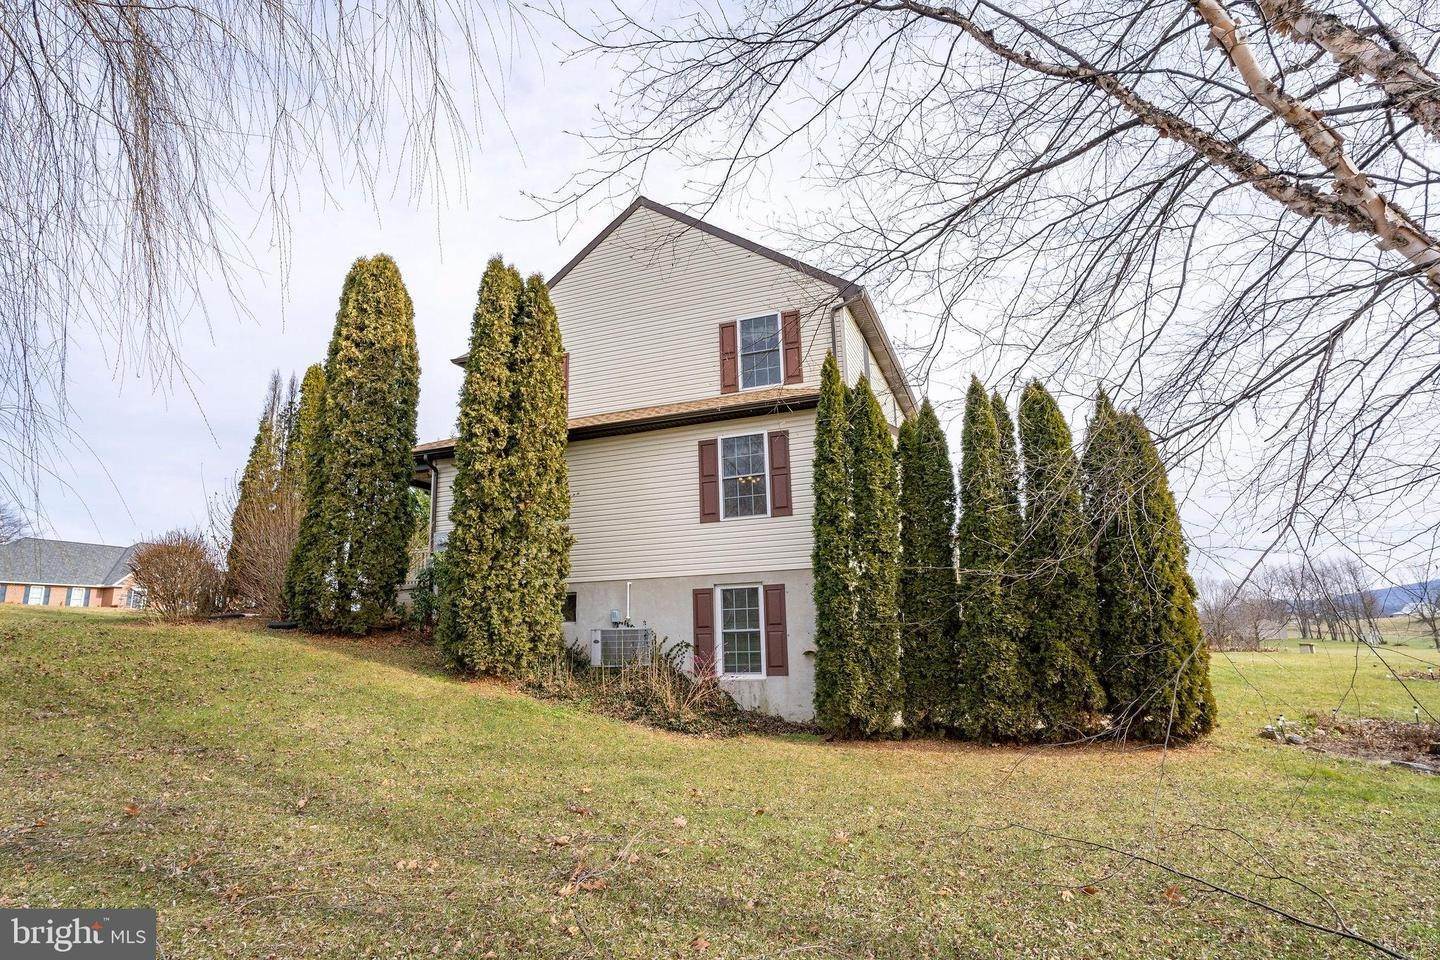 17. Residential for Sale at 108 COUNTRY Lane Richland, Pennsylvania 17087 United States